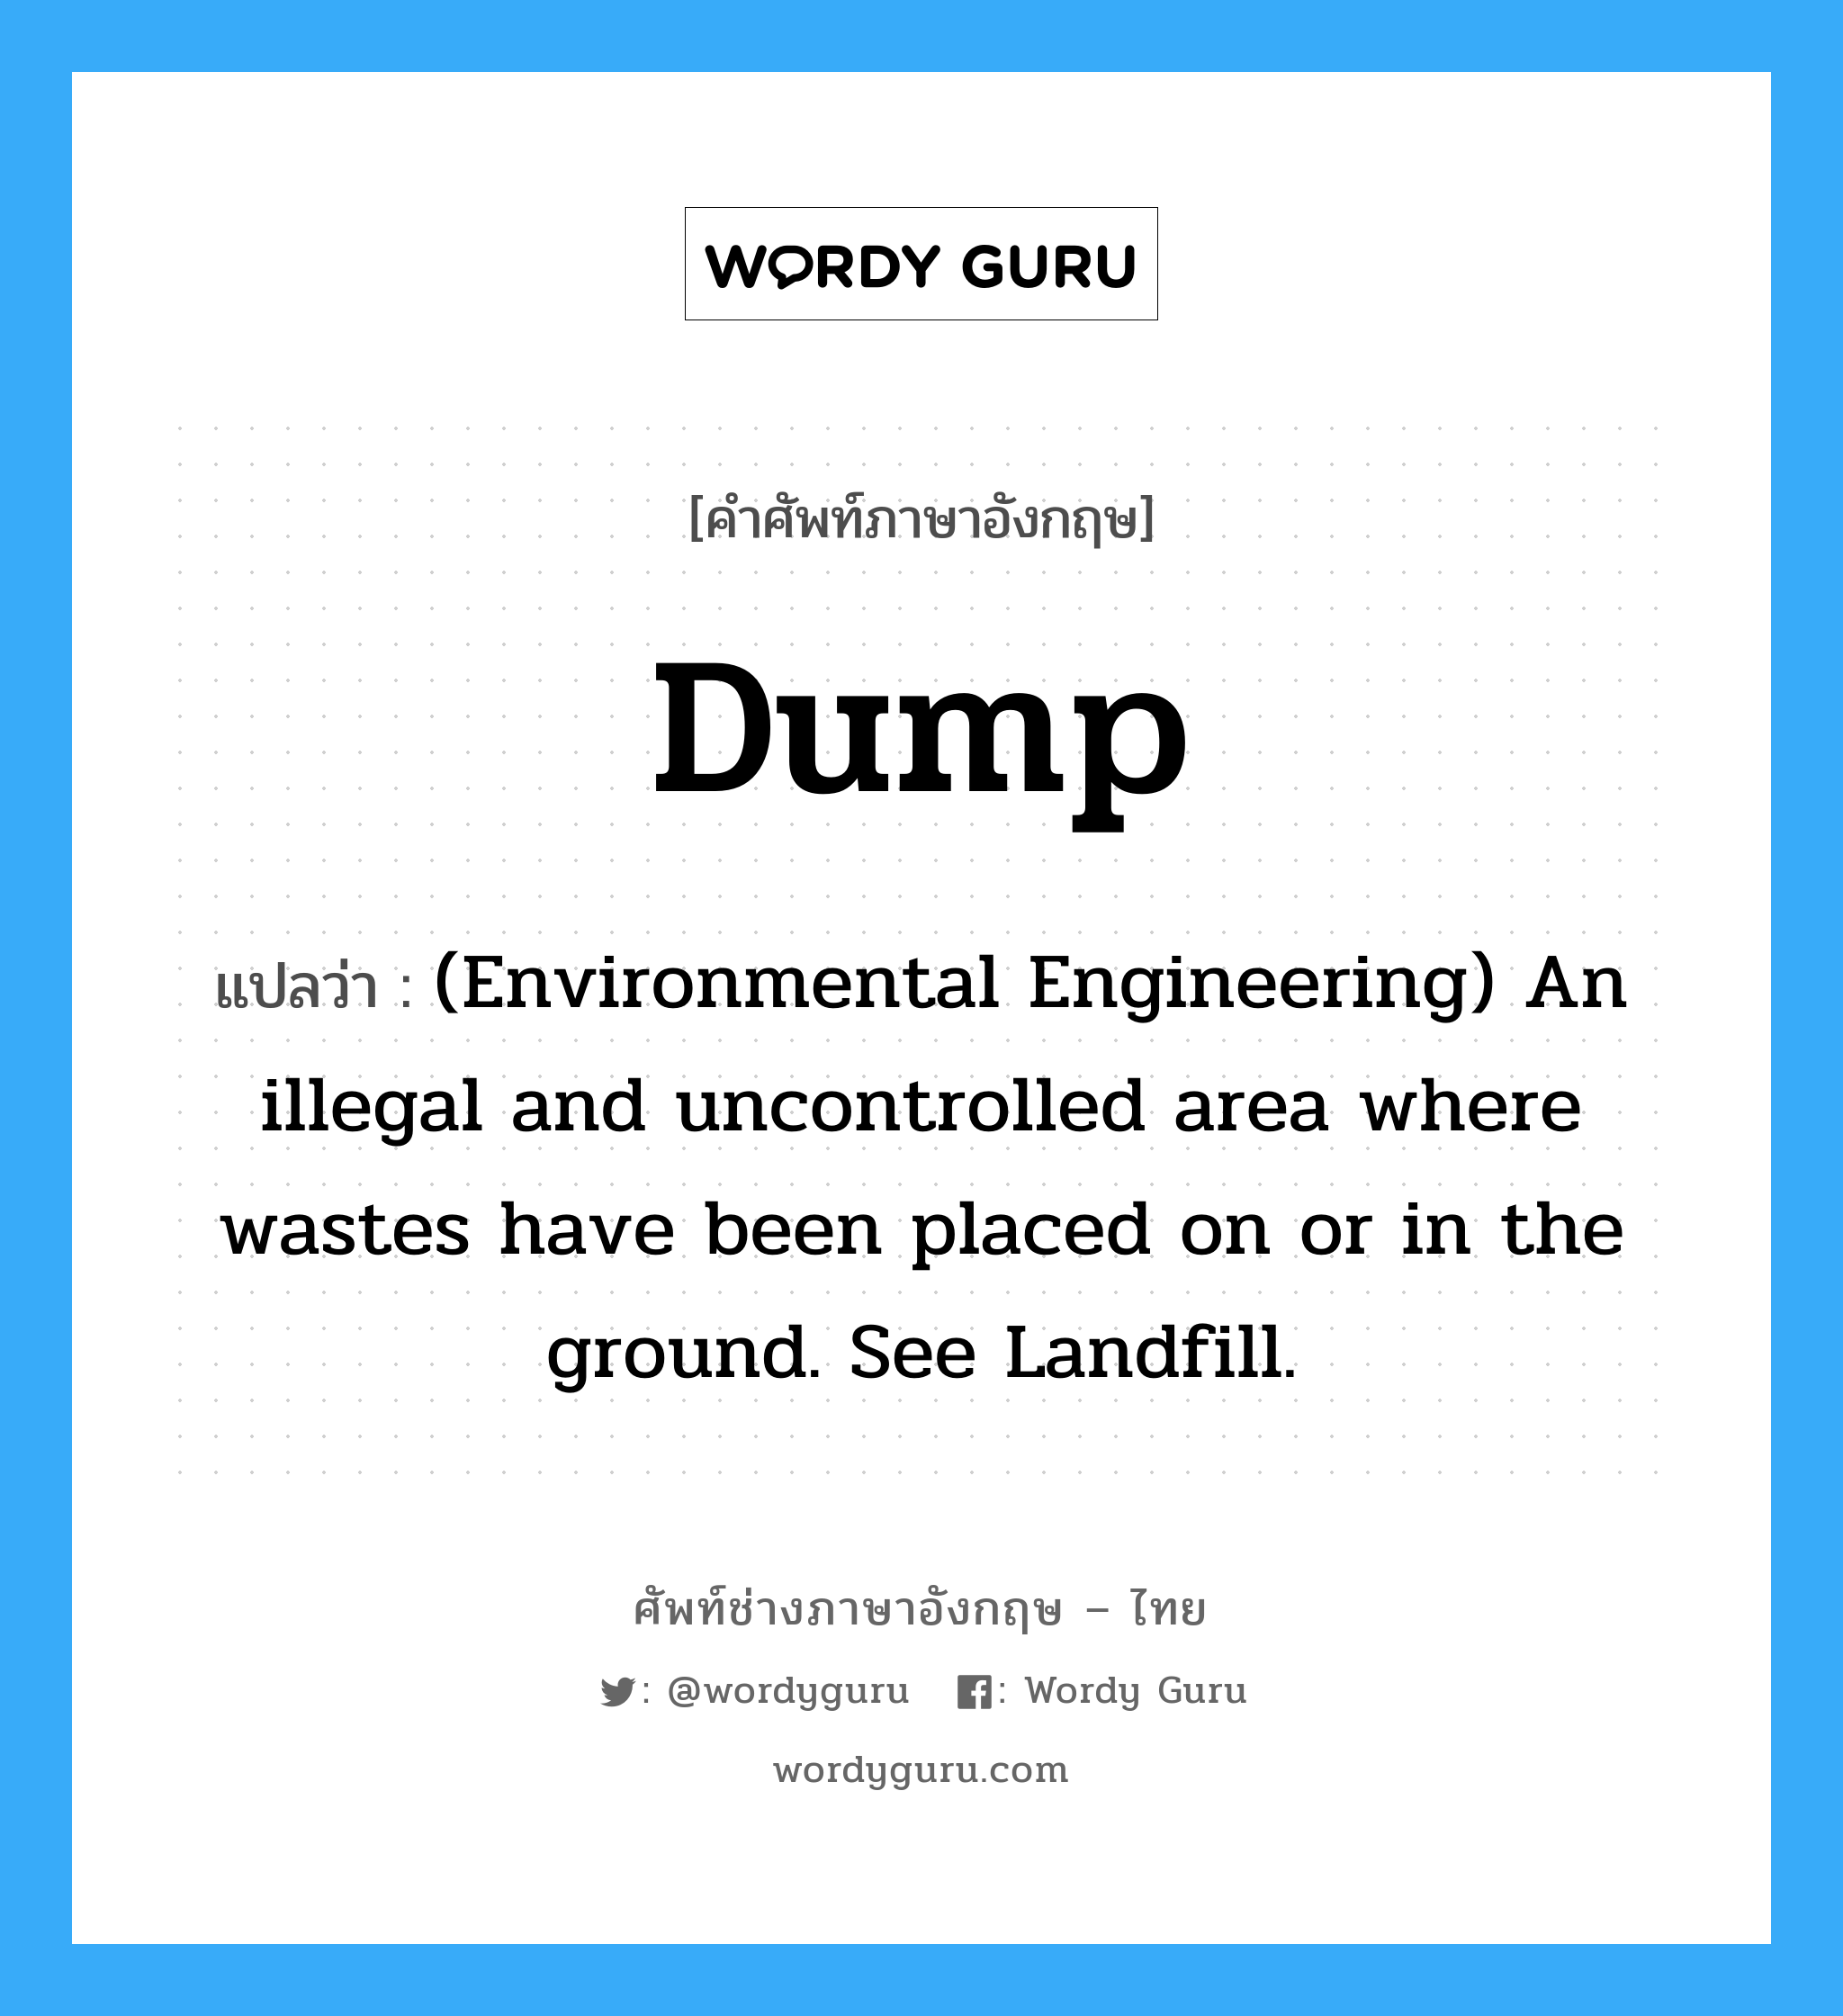 Dump แปลว่า?, คำศัพท์ช่างภาษาอังกฤษ - ไทย Dump คำศัพท์ภาษาอังกฤษ Dump แปลว่า (Environmental Engineering) An illegal and uncontrolled area where wastes have been placed on or in the ground. See Landfill.